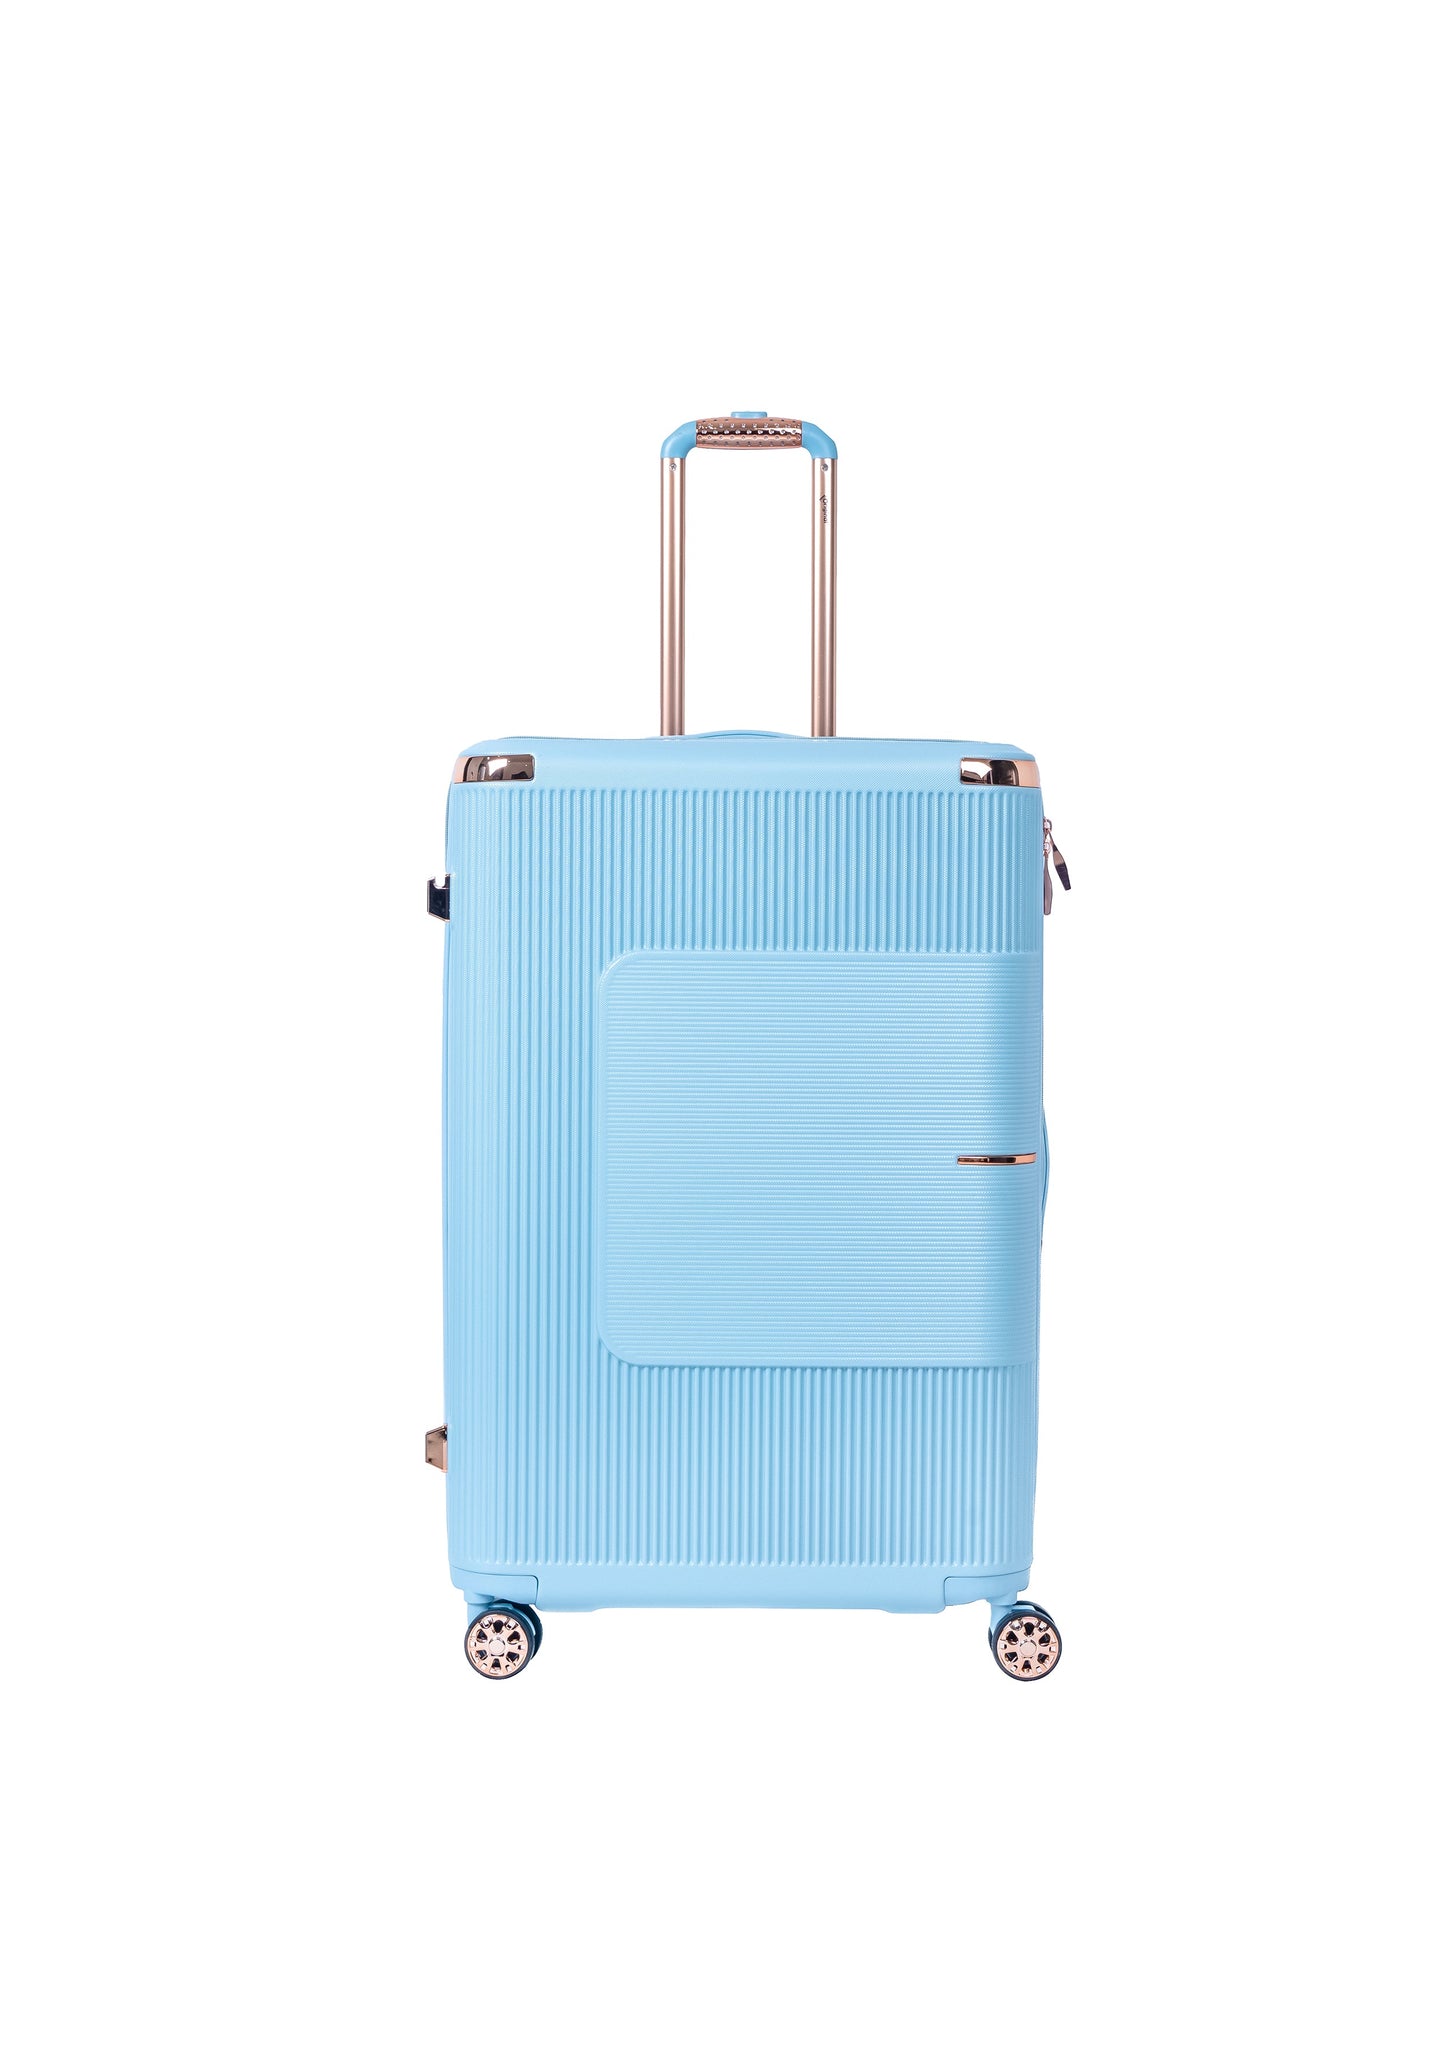 Original®-Trolley Bag available in Single Pc Carry on Luggage/Checked In Luggage